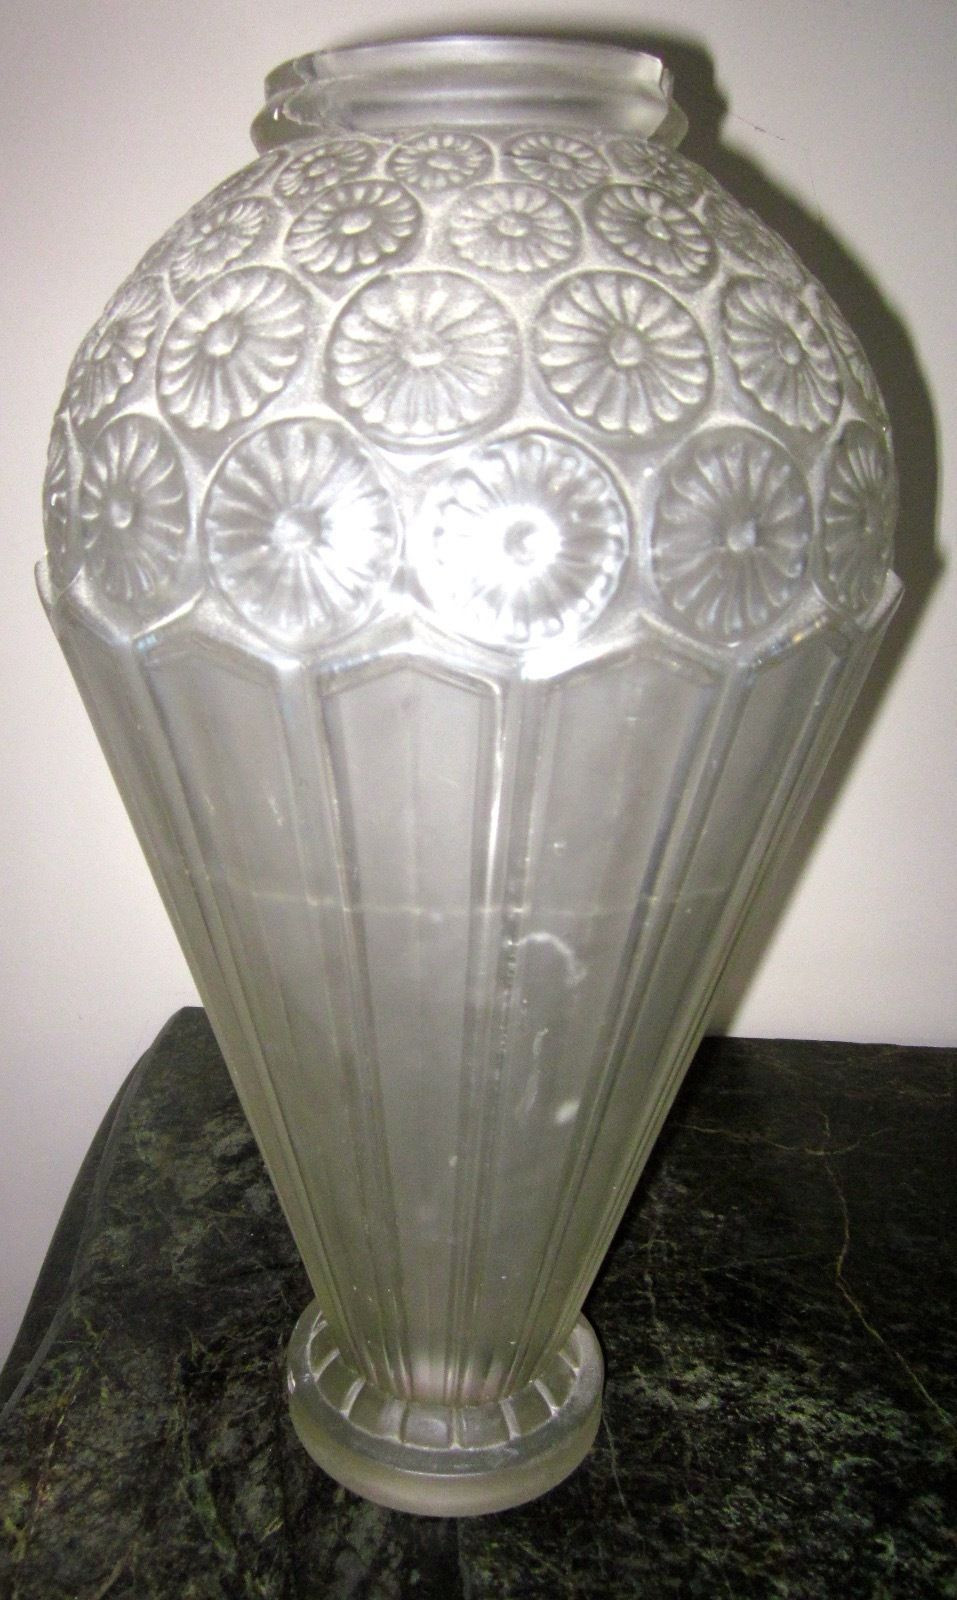 25 attractive Cheap Red Vases 2024 free download cheap red vases of art deco vase pierre davesn circa 1930 modele nid d abeilles in throughout vase art daco genet michon verre pressa dacors gaomatriques fr picclick com